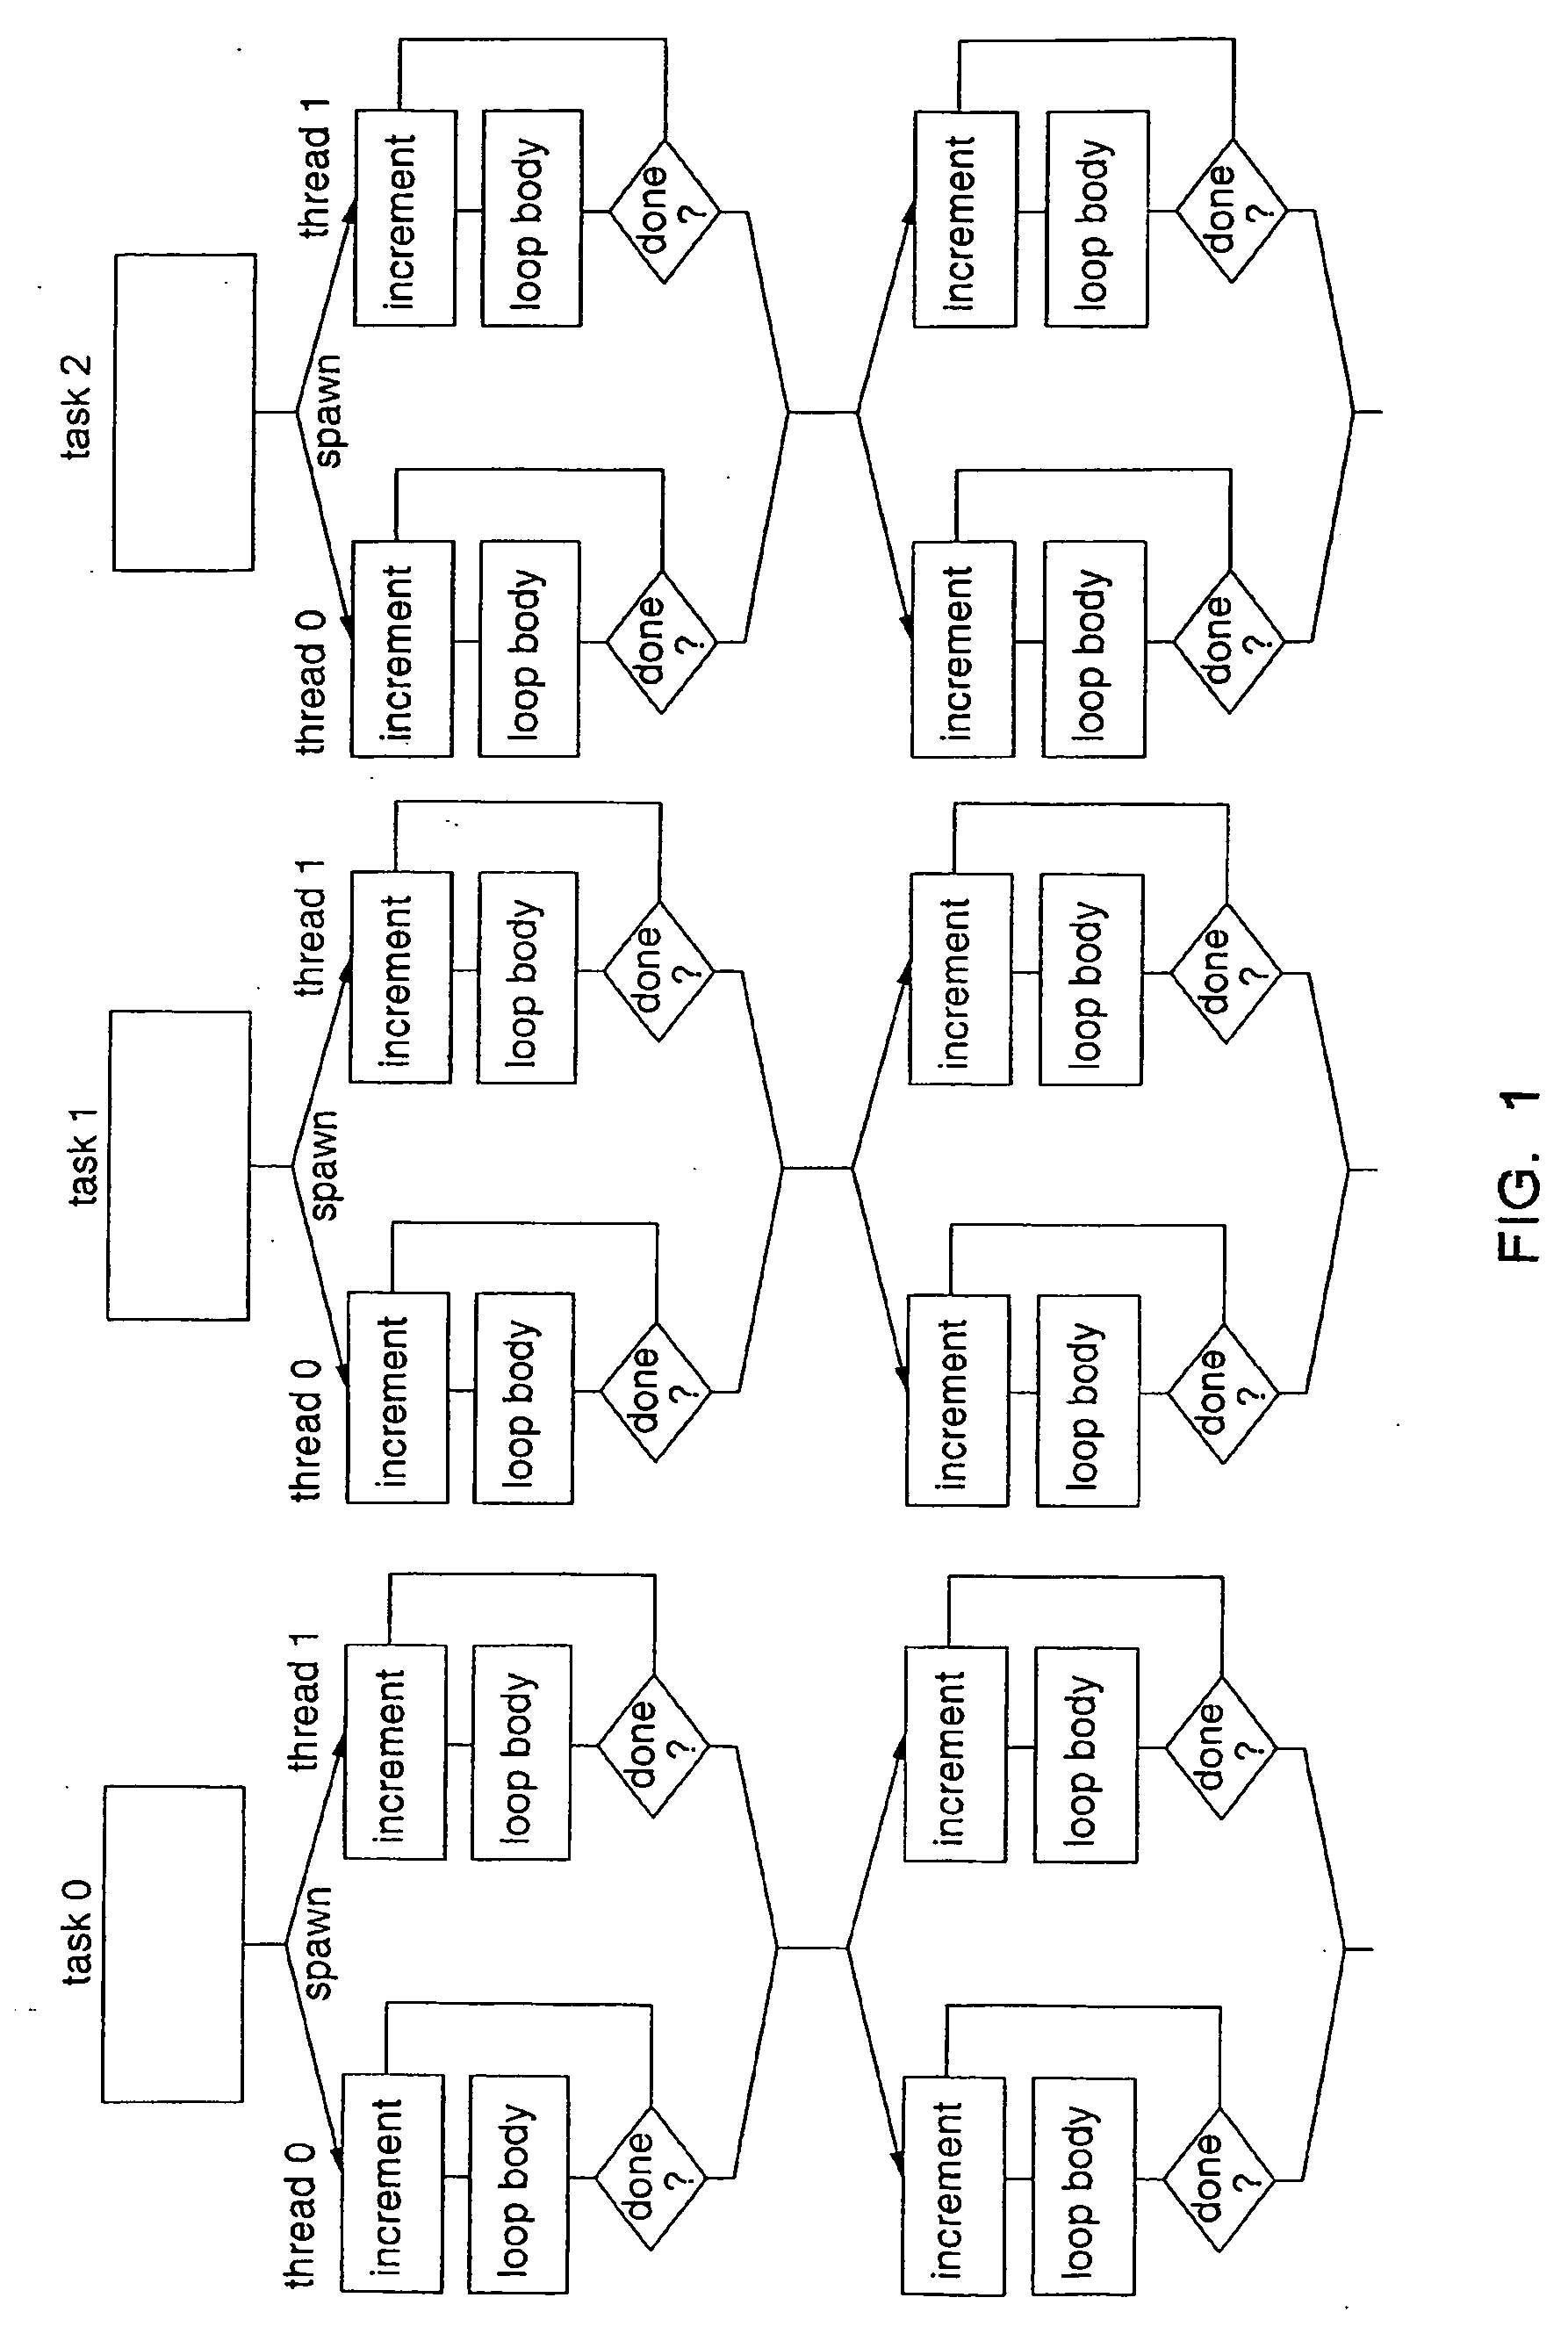 Method and system for mapping threads or tasks to CPUs in a parallel computer